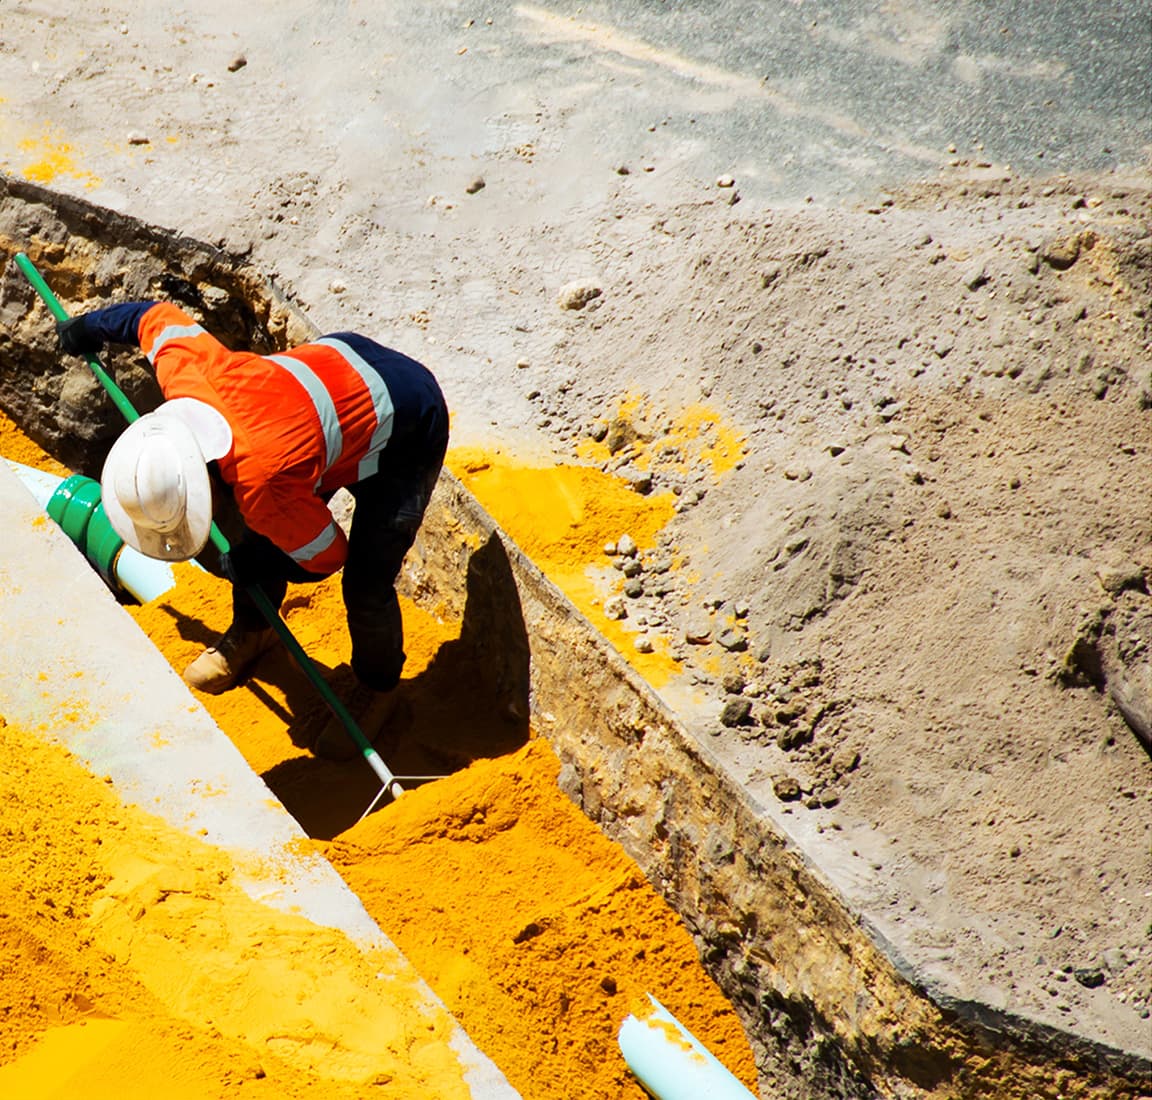 A utility worker in an orange vest and white sunshade hard hat shoveling yellow dirt in a trench